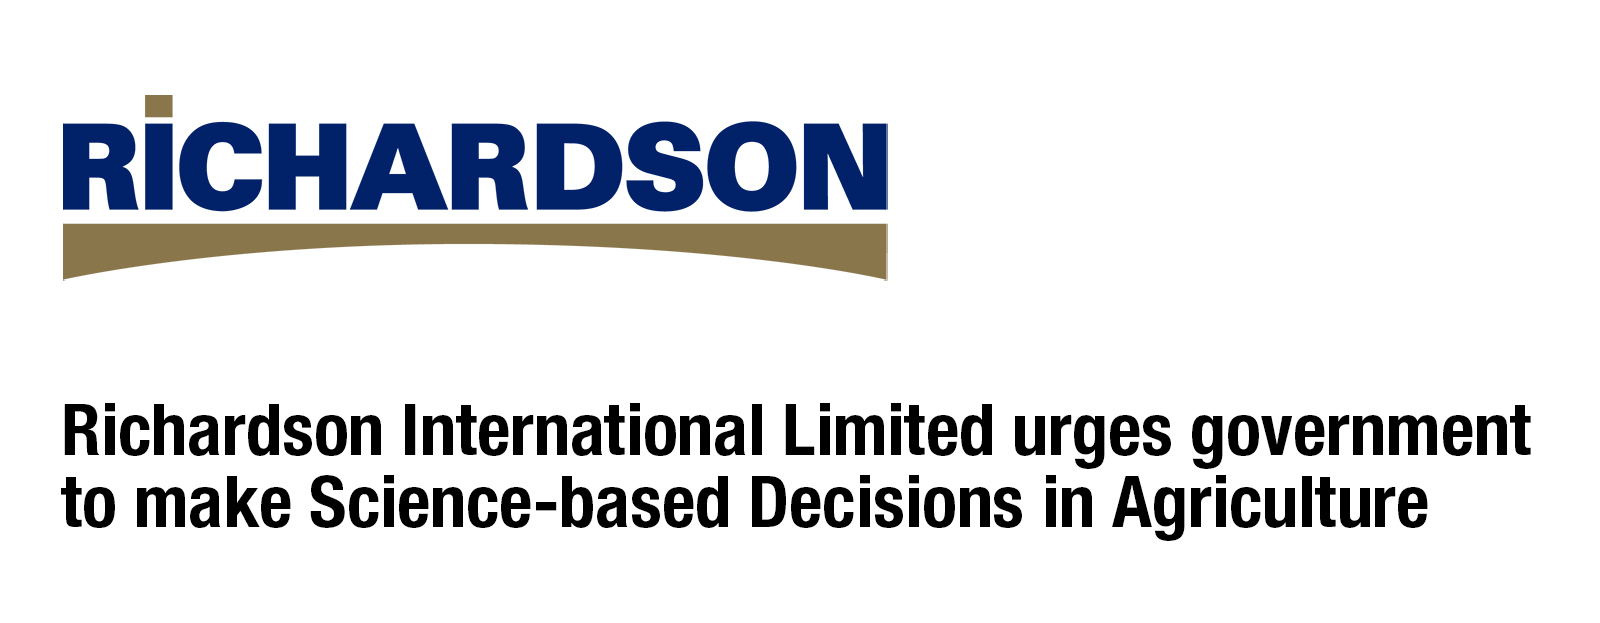 Banner for Richardson International Limited urges government to make Science-based Decisions in Agriculture